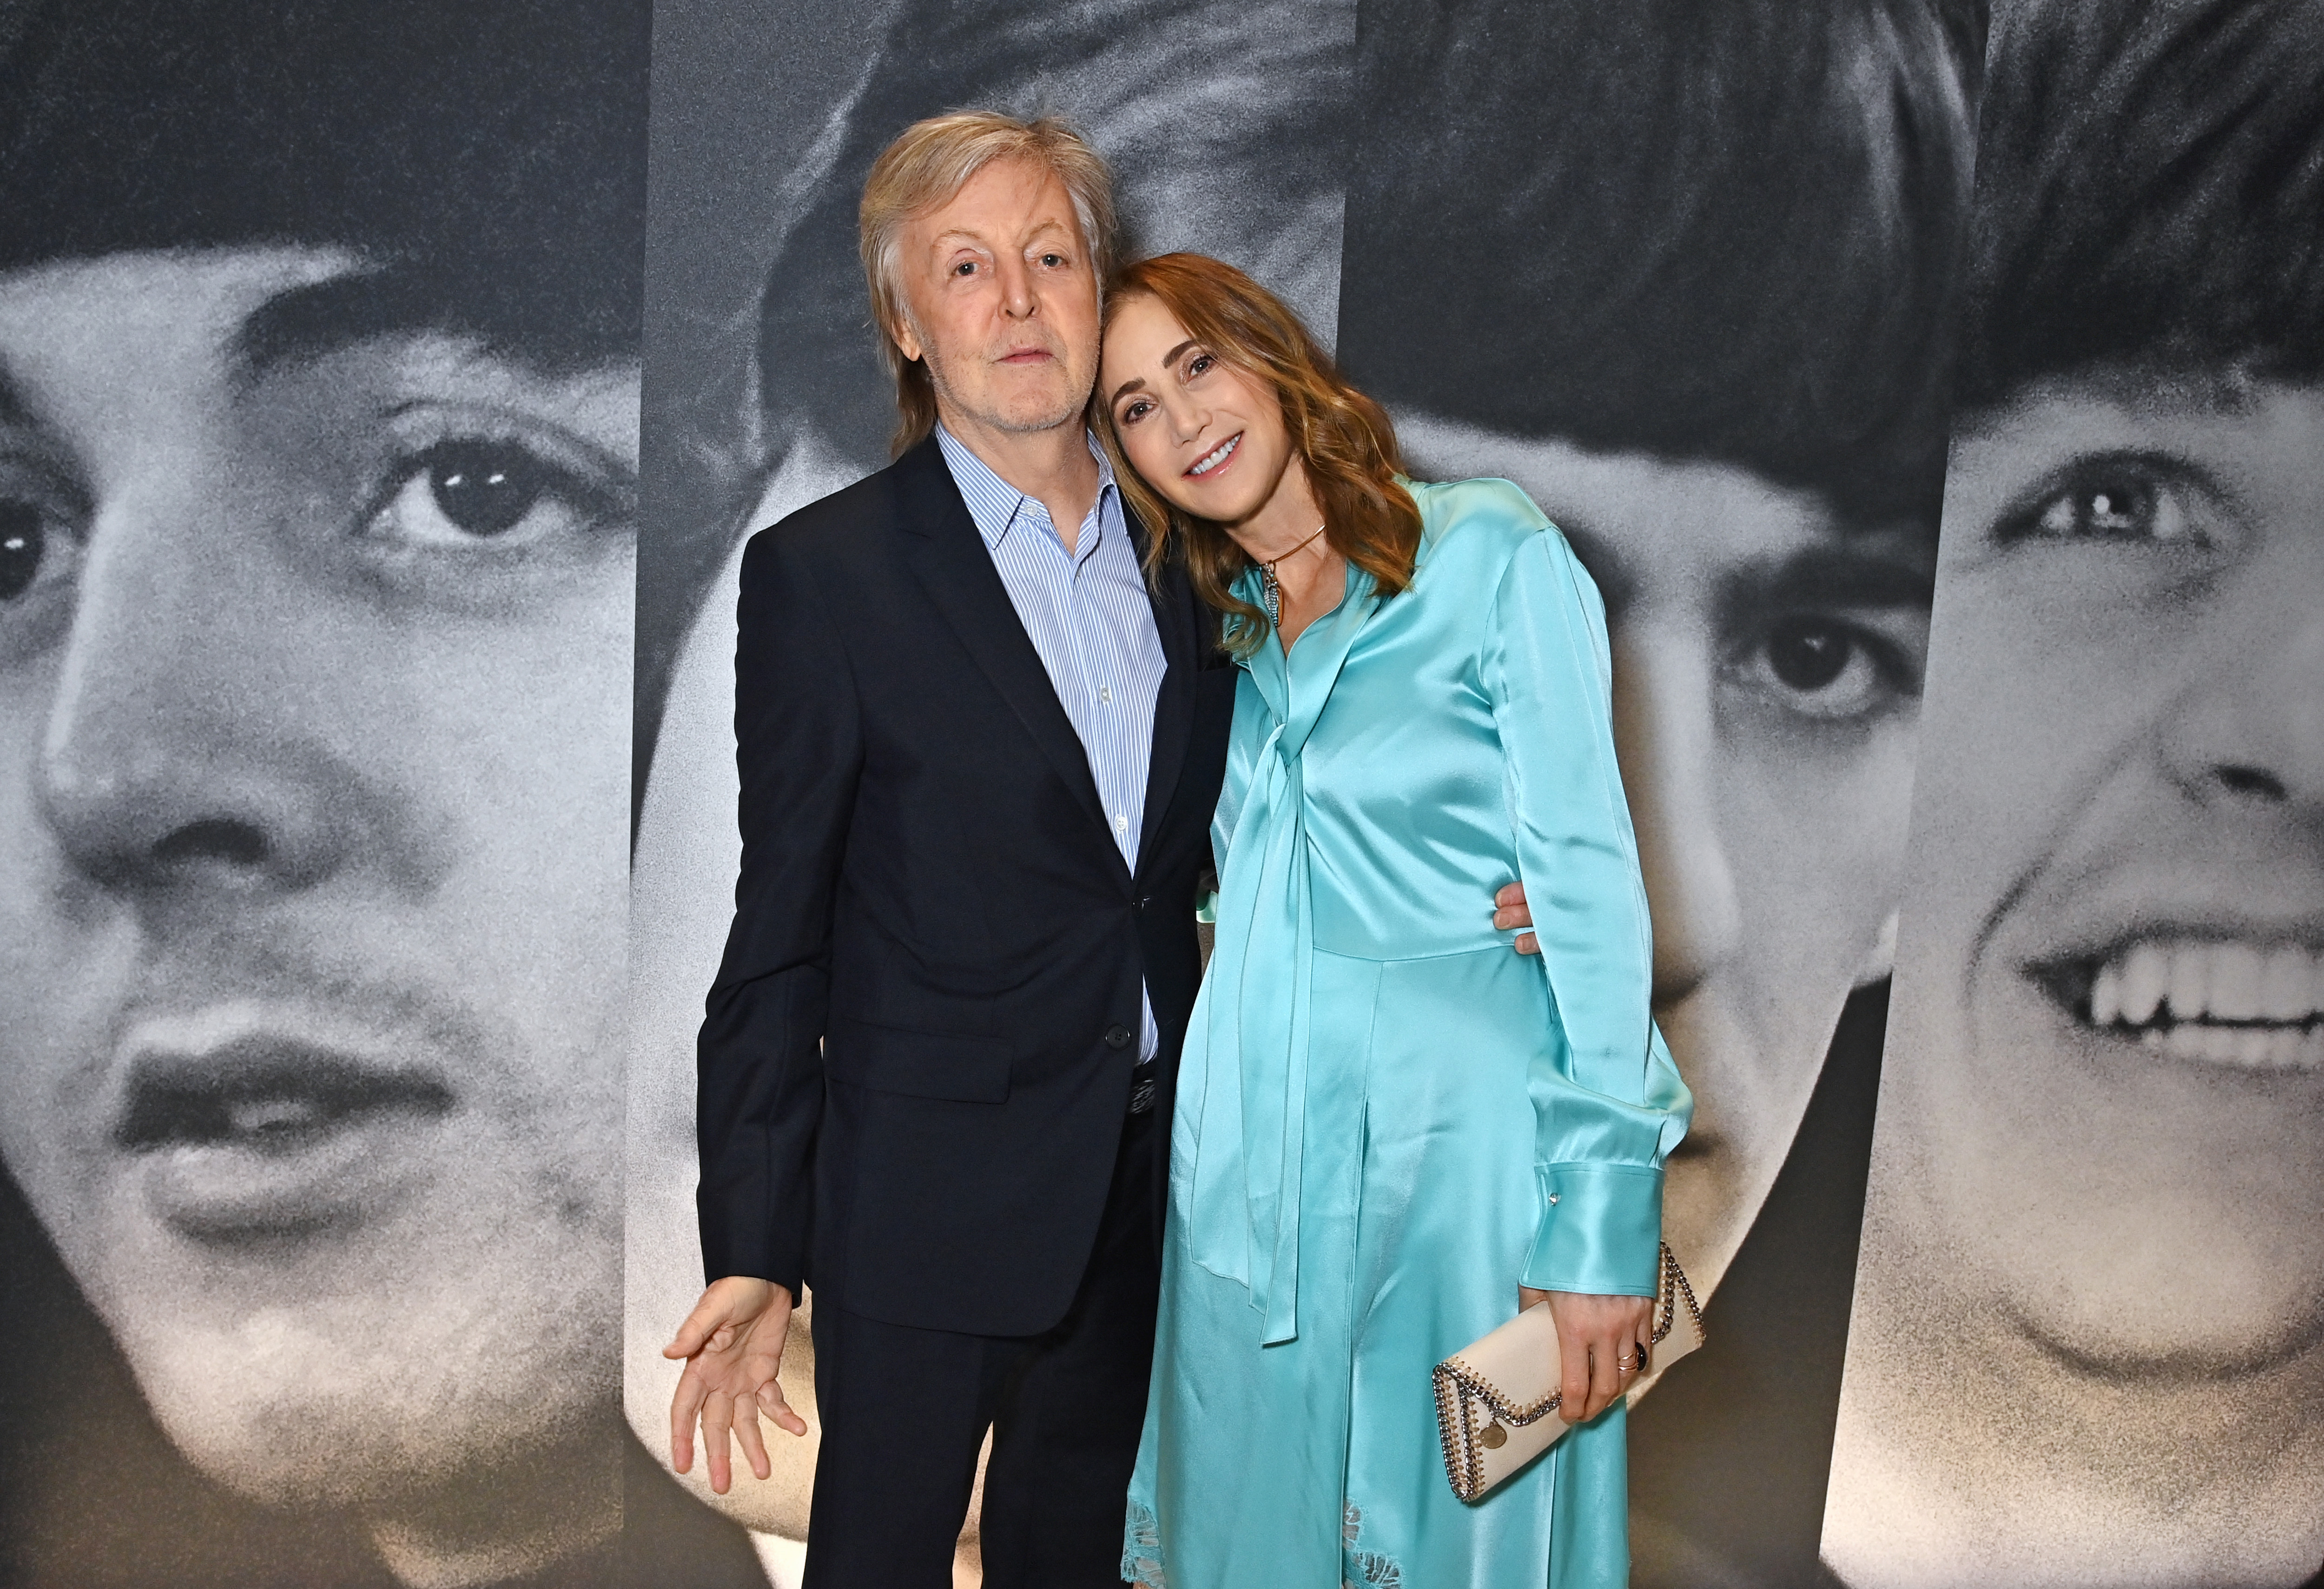 Paul McCartney and Nancy Shevell attend the private view of 'Paul McCartney Photographs 1963-64: Eyes of the Storm" at the National Portrait Gallery, on June 26, 2023, in London, England. | Source: Getty Images